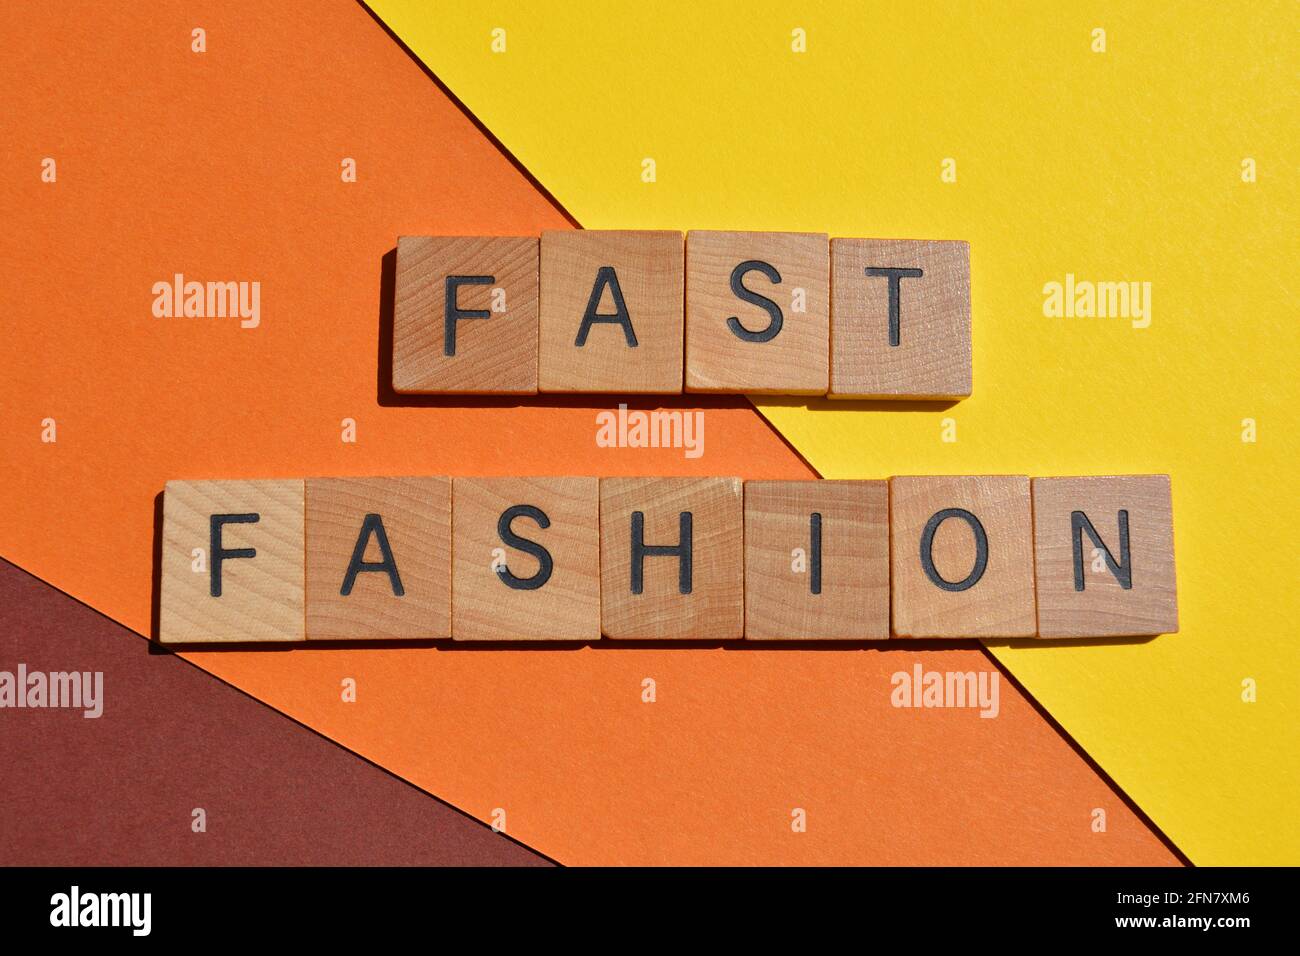 Fast Fashion, term used to describe a highly profitable business model based on replicating design trends and mass producing them at low cost Stock Photo